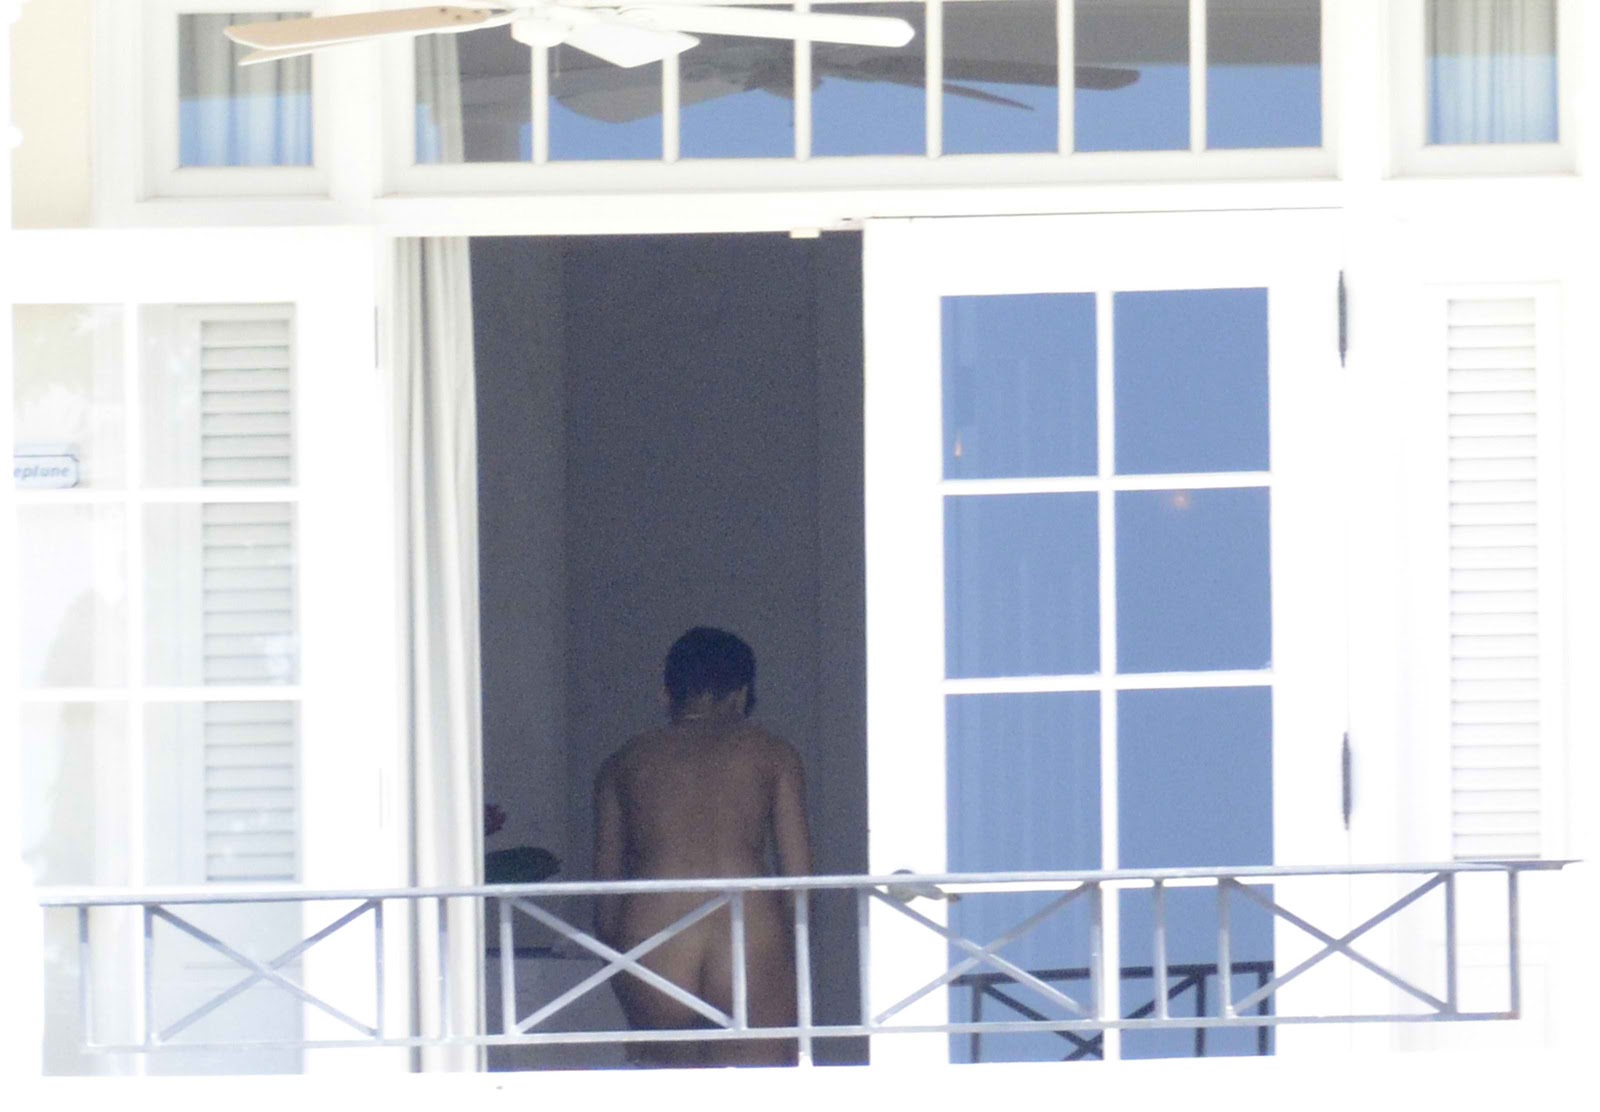 Rihanna “Caught” Nude by Paparazzi While Changing Bikinis in Barbados.